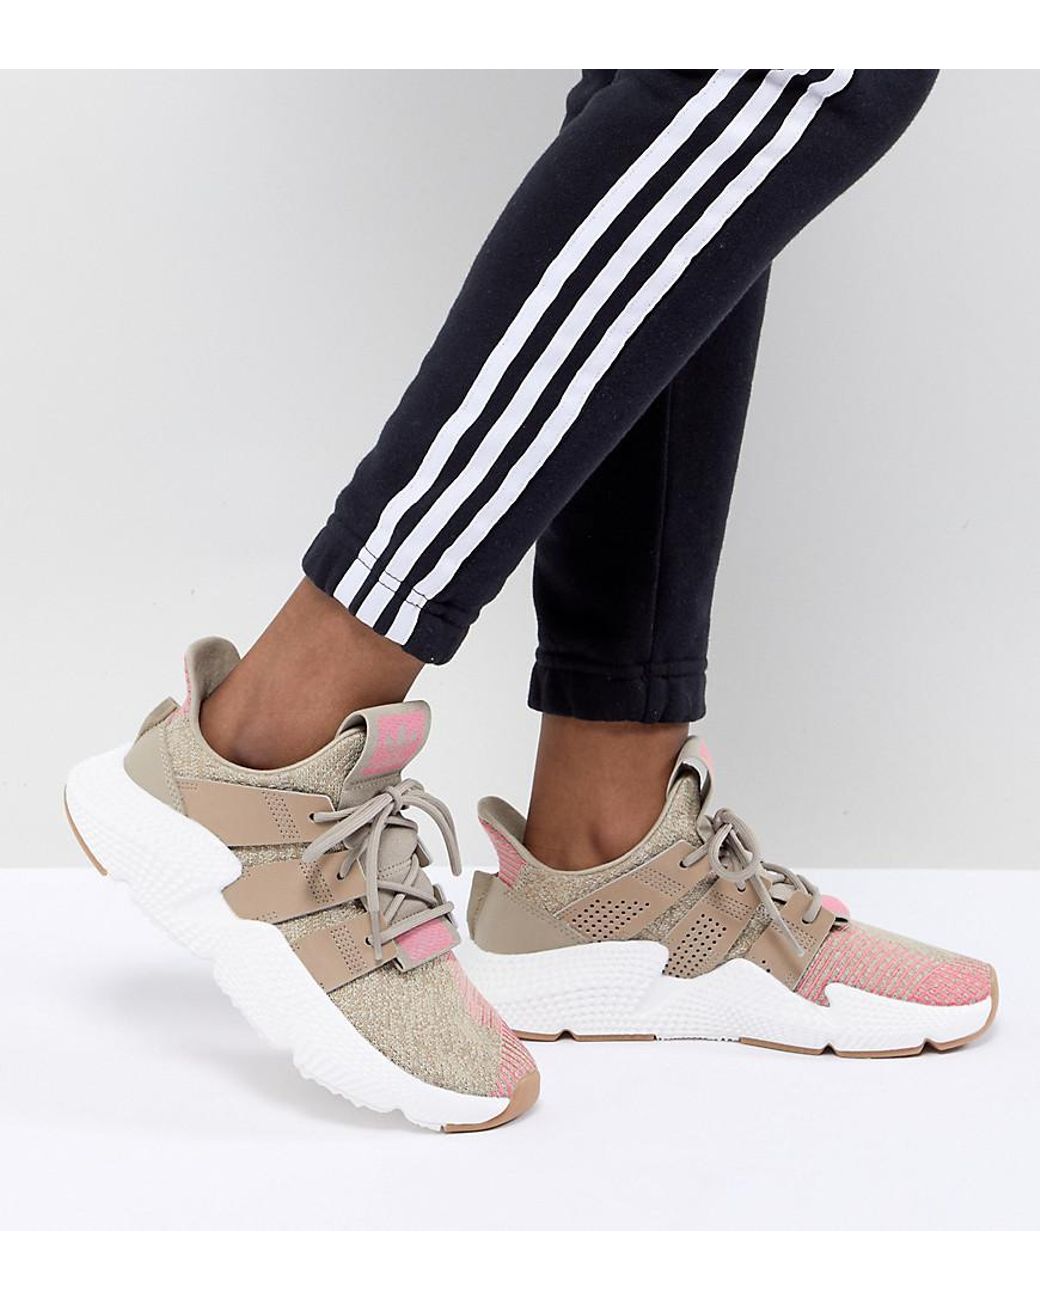 adidas Originals Prophere Trainers In Beige And Pink in Natural | Lyst